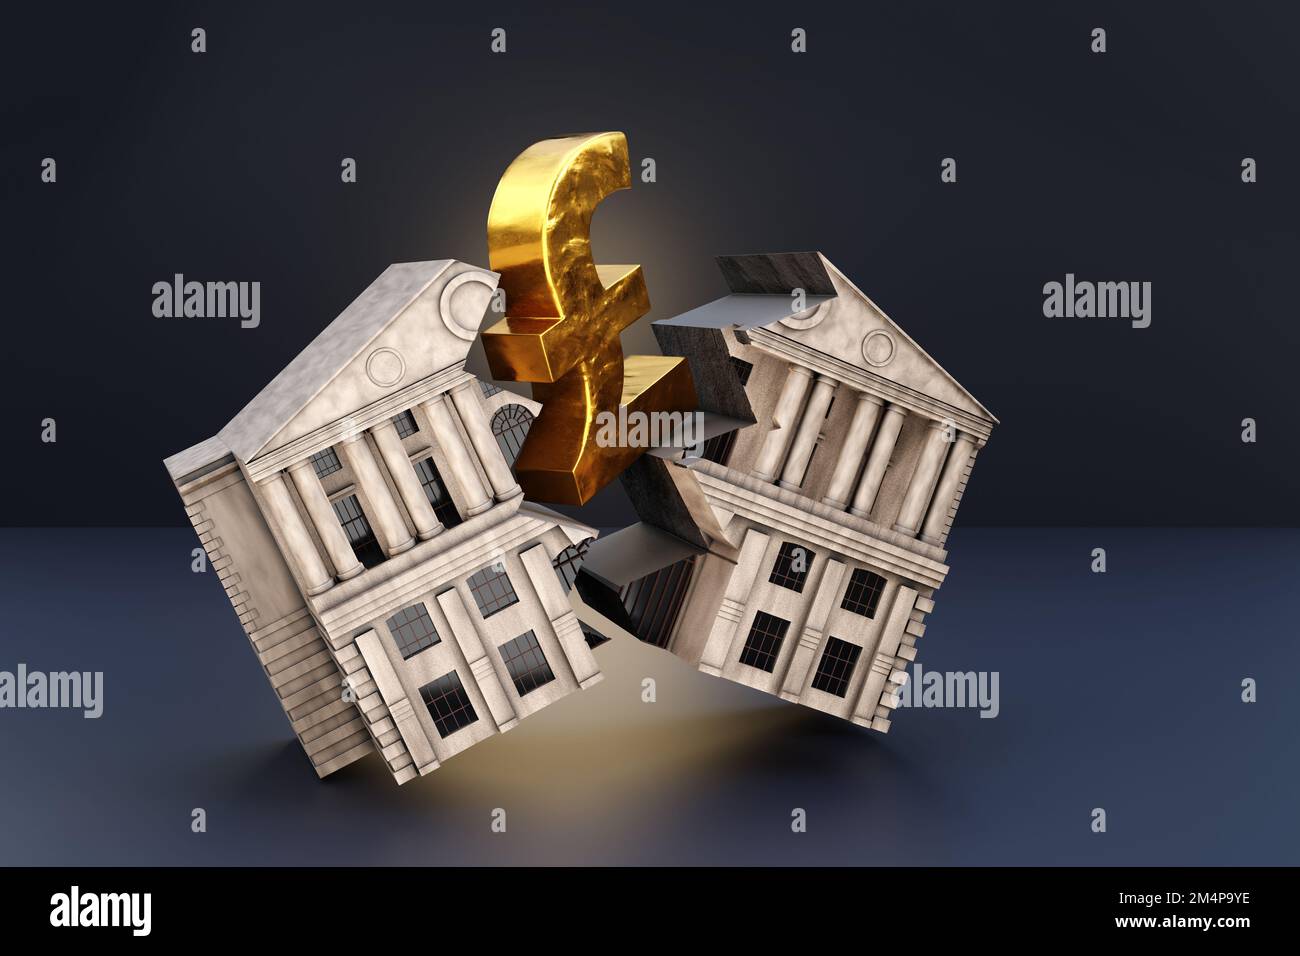 Golden British pound sign breaks an ancient bank building into halves.The concept of the impact and crisis of falling price of UK sterling. Stock Photo